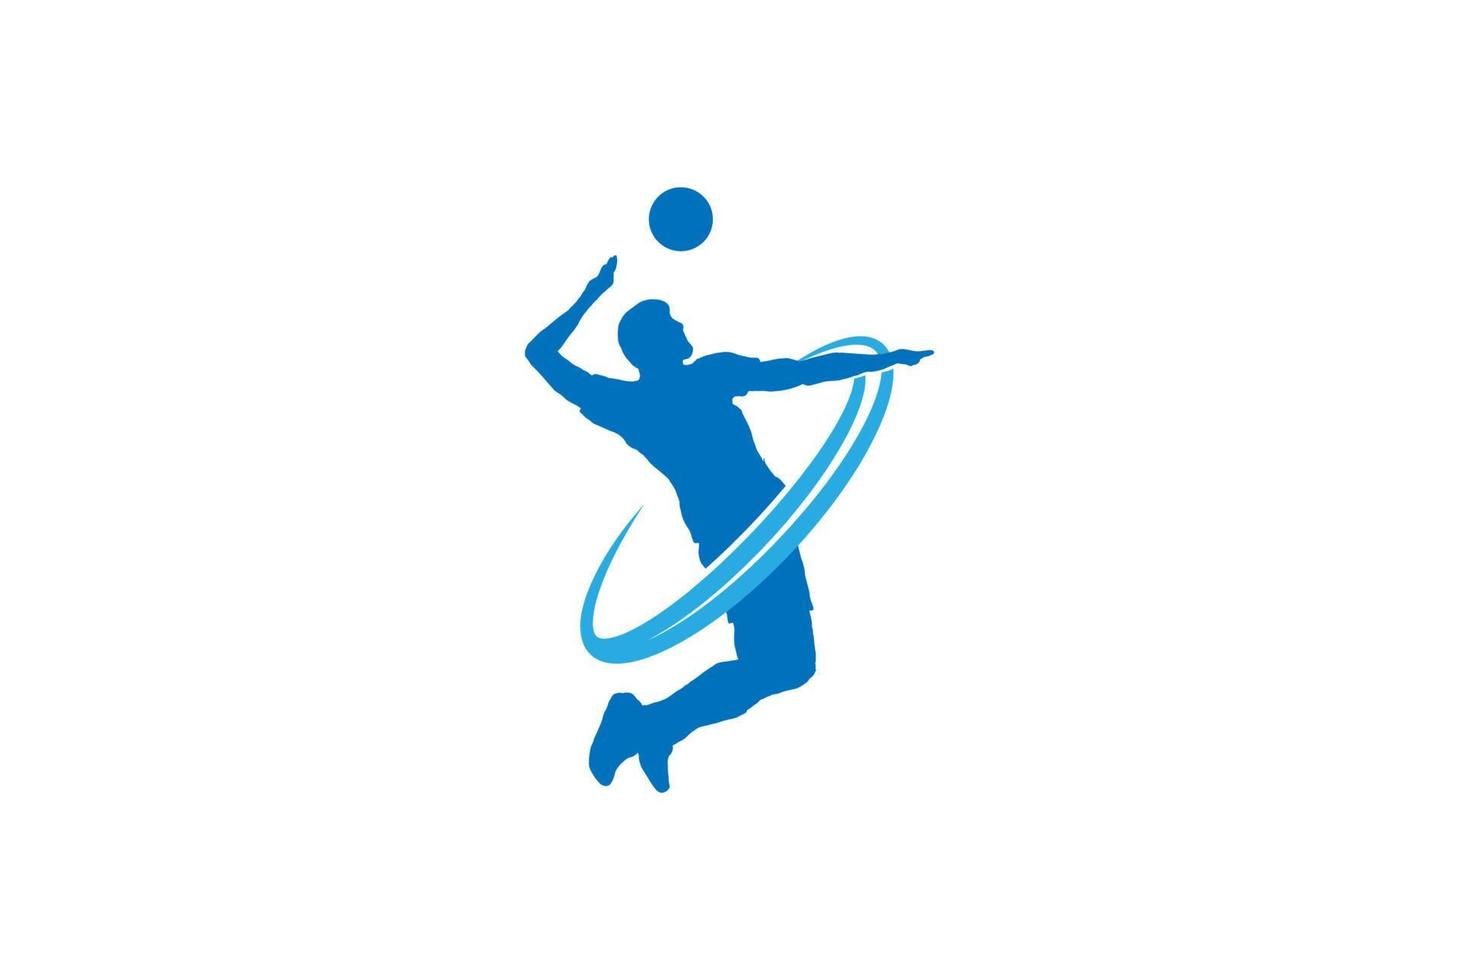 Jumping Spike Smash Man Silhouette with Ball for Volley Sport Club Logo Design Vector